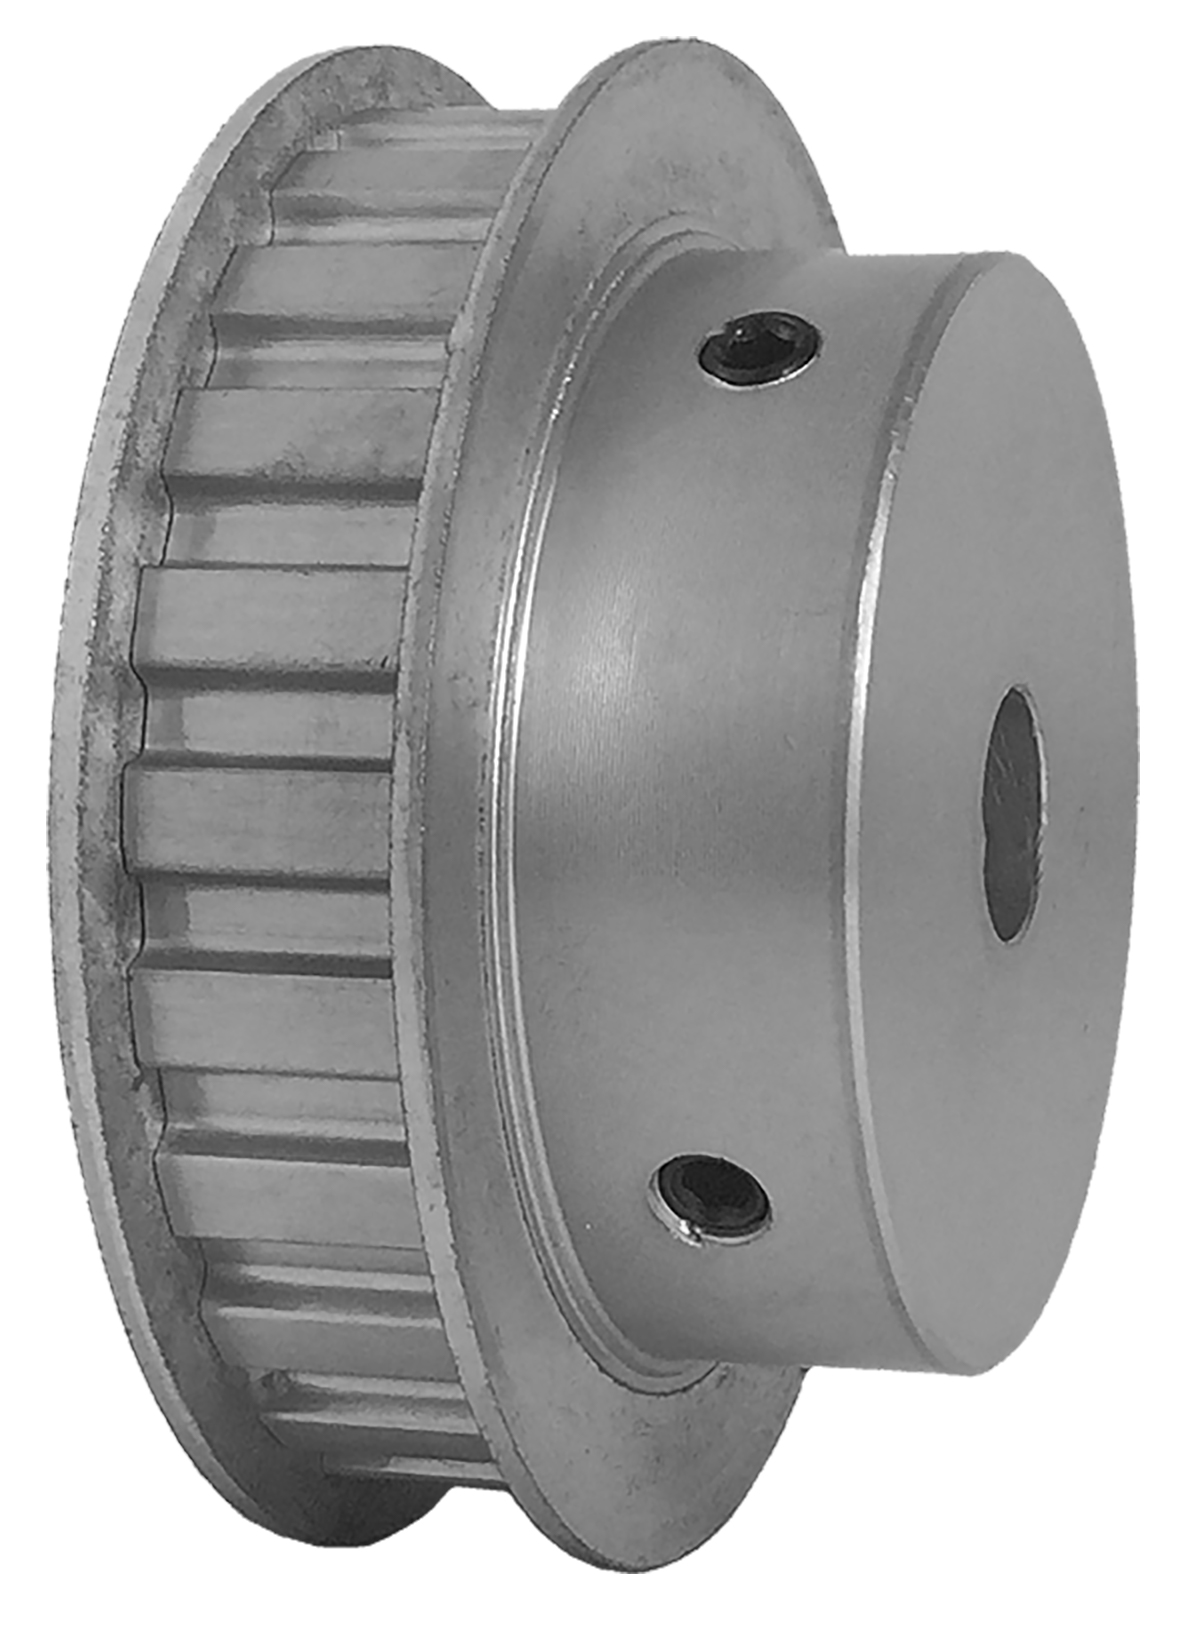 24L050-6FA6 - Aluminum Imperial Pitch Pulleys